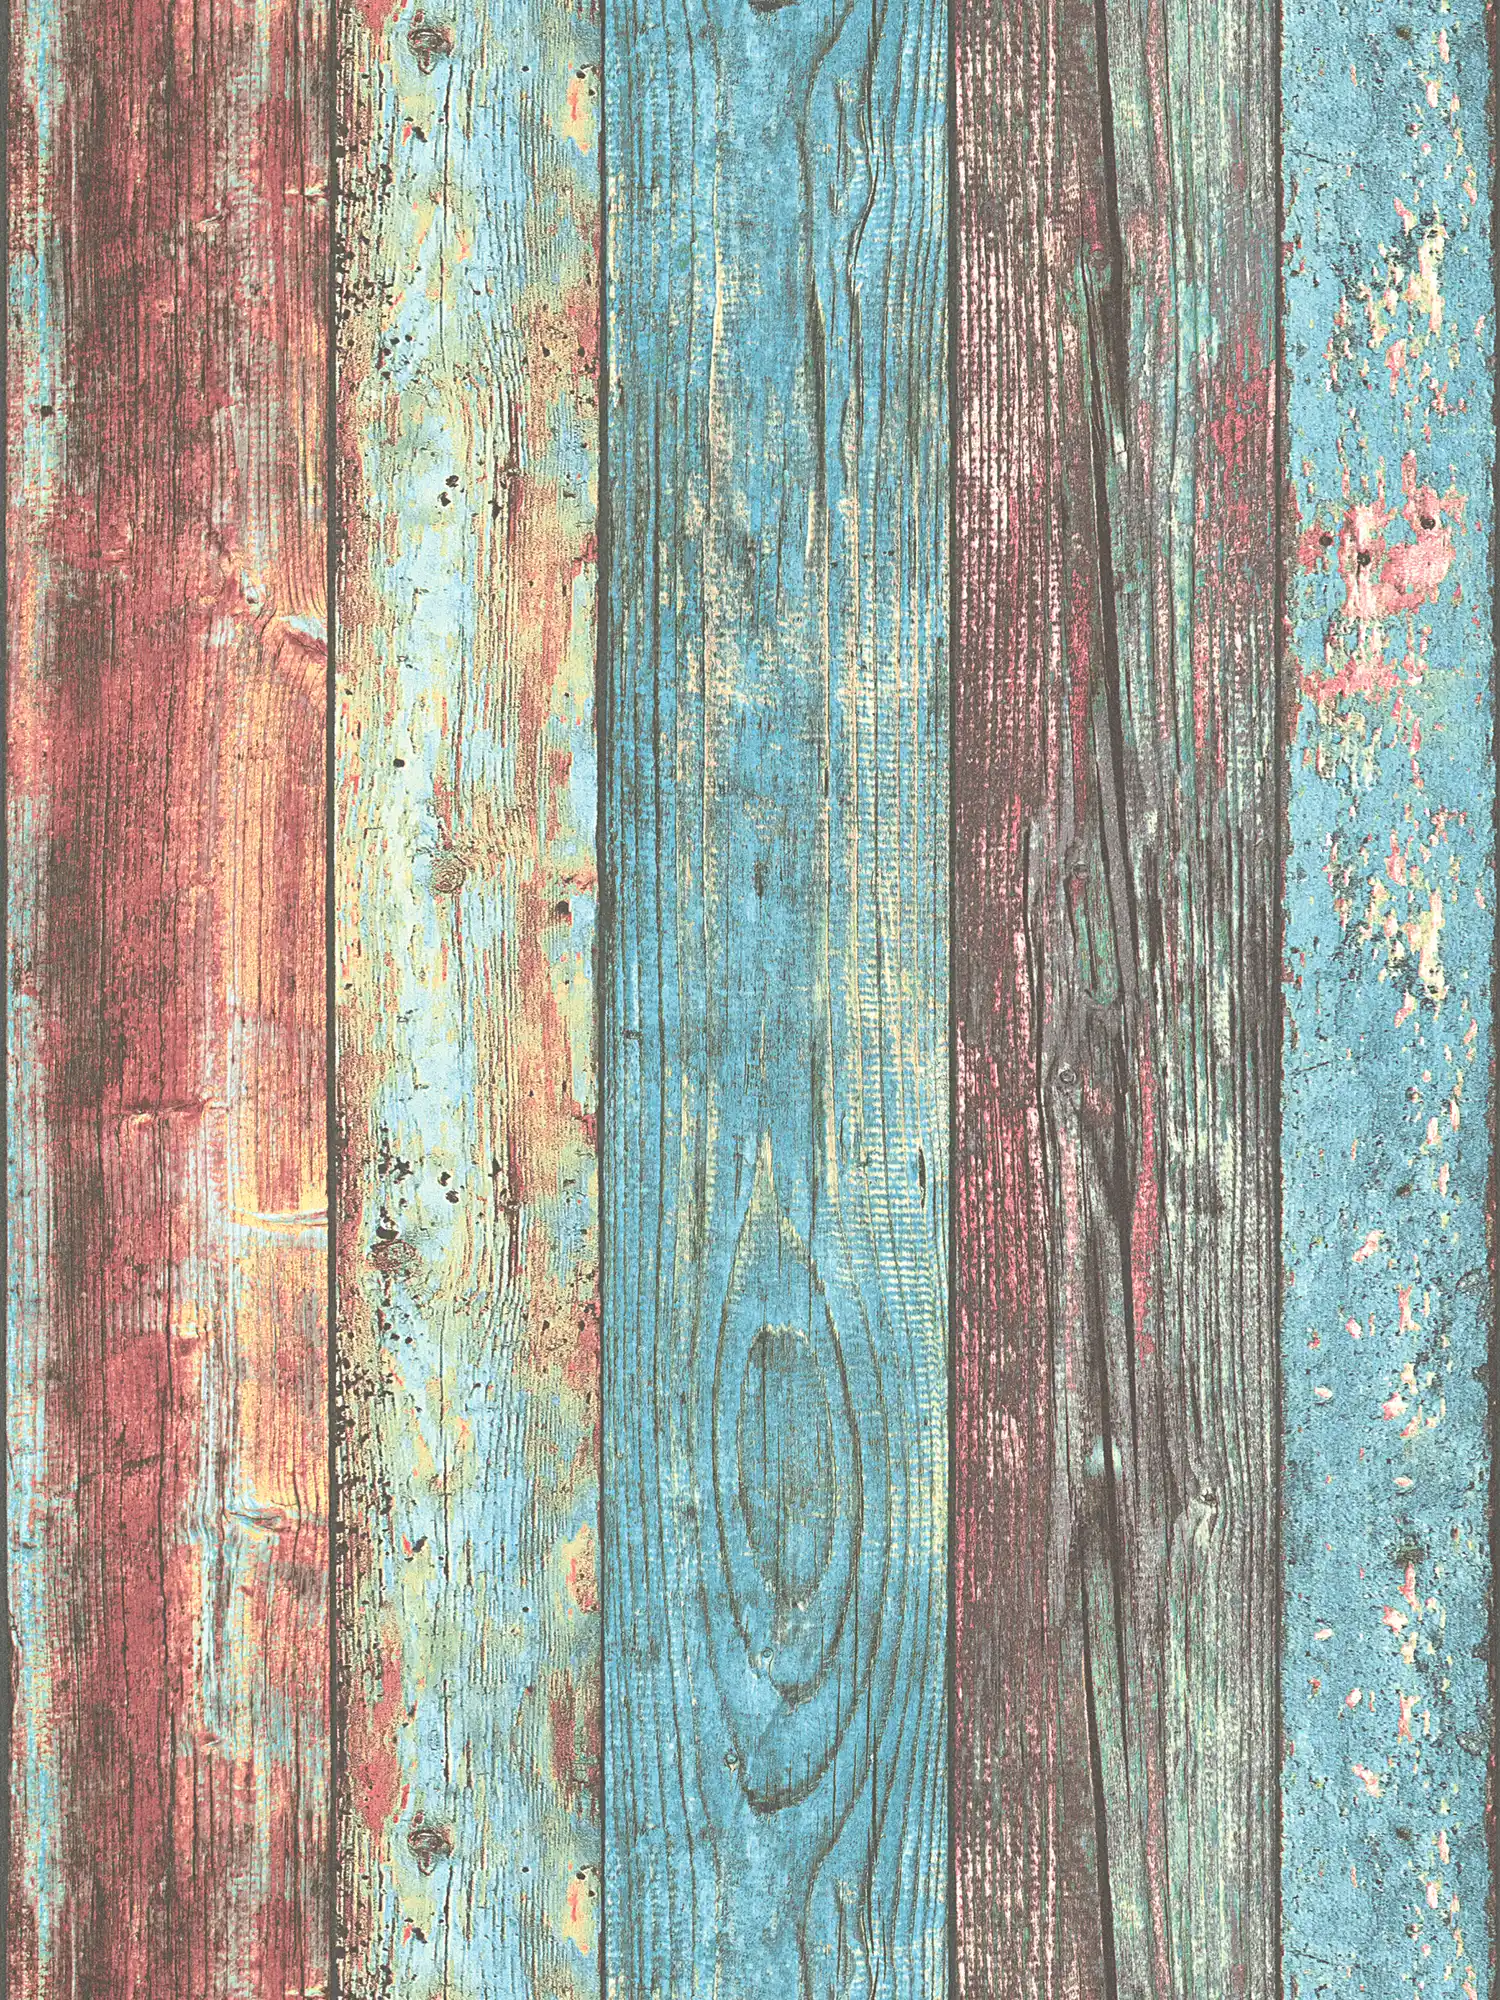         Colorful wood wallpaper Shabby Chic Style with boards pattern - Blue, Red, Brown
    